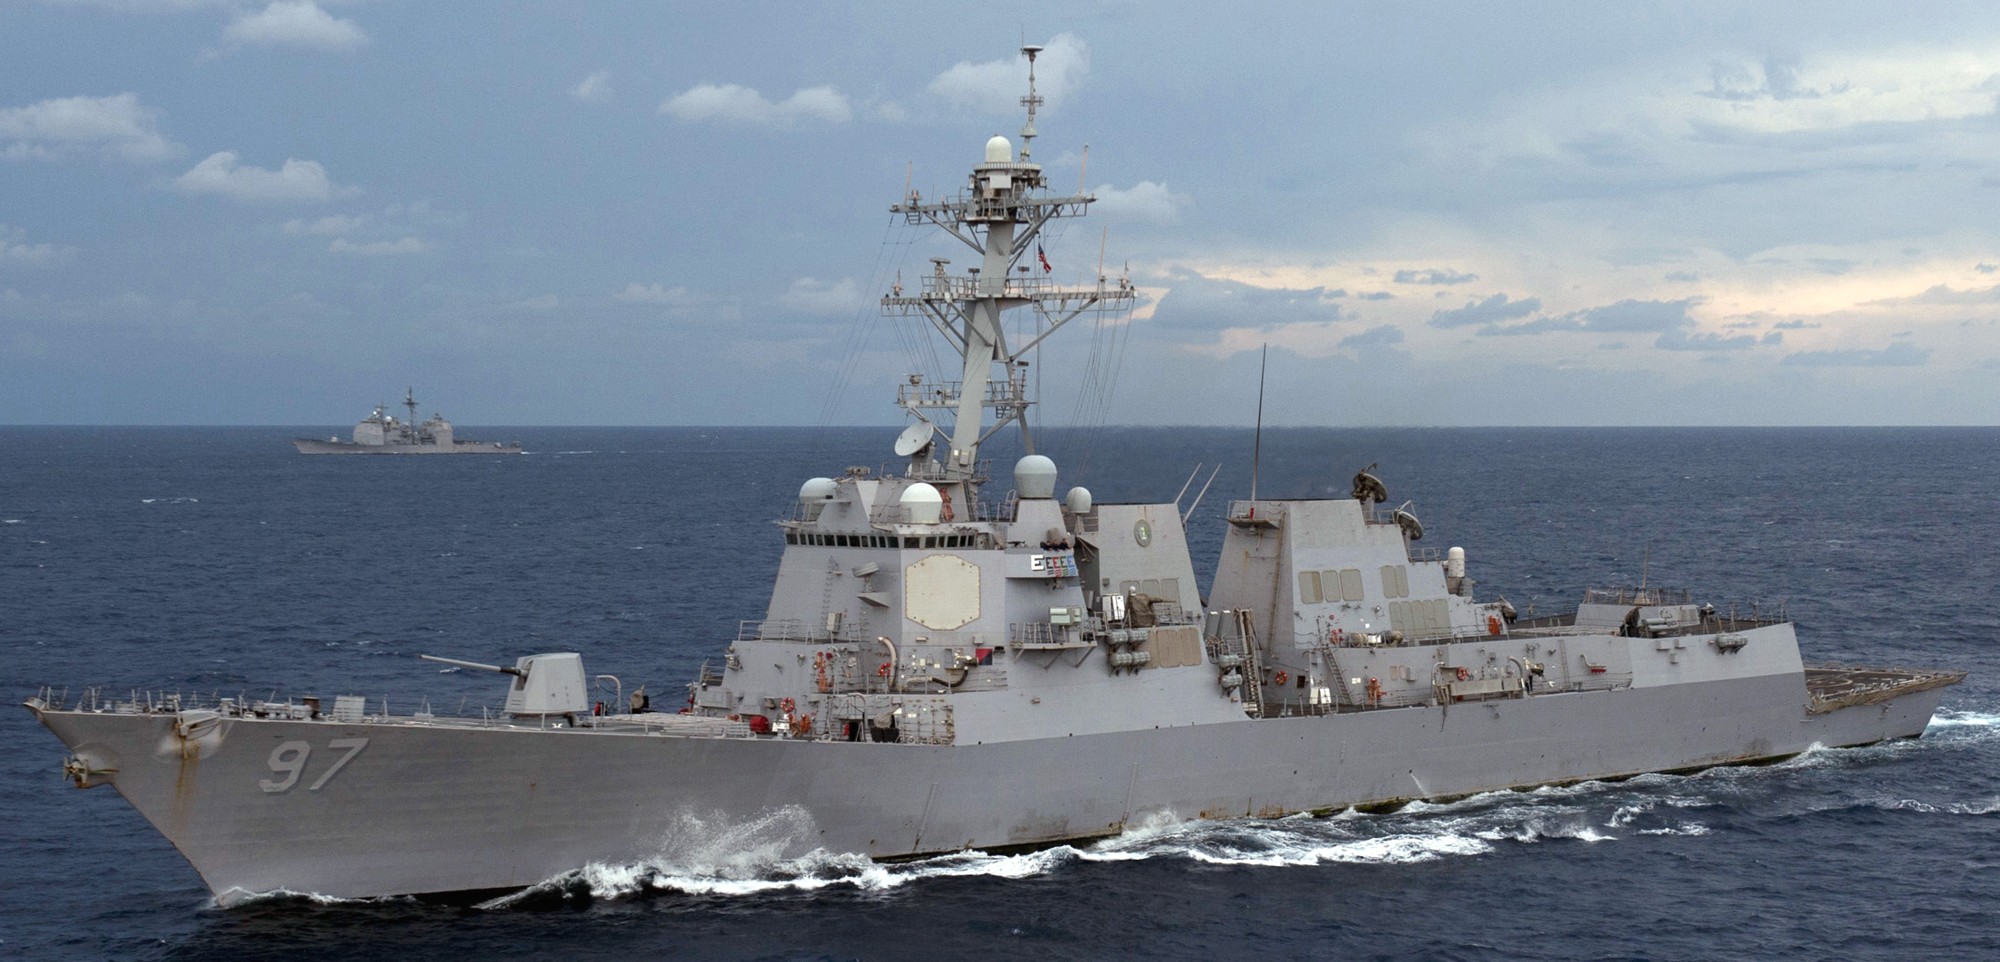 ddg-97 uss halsey arleigh burke class guided missile destroyer aegis us navy exercise malabar bay bengal 14